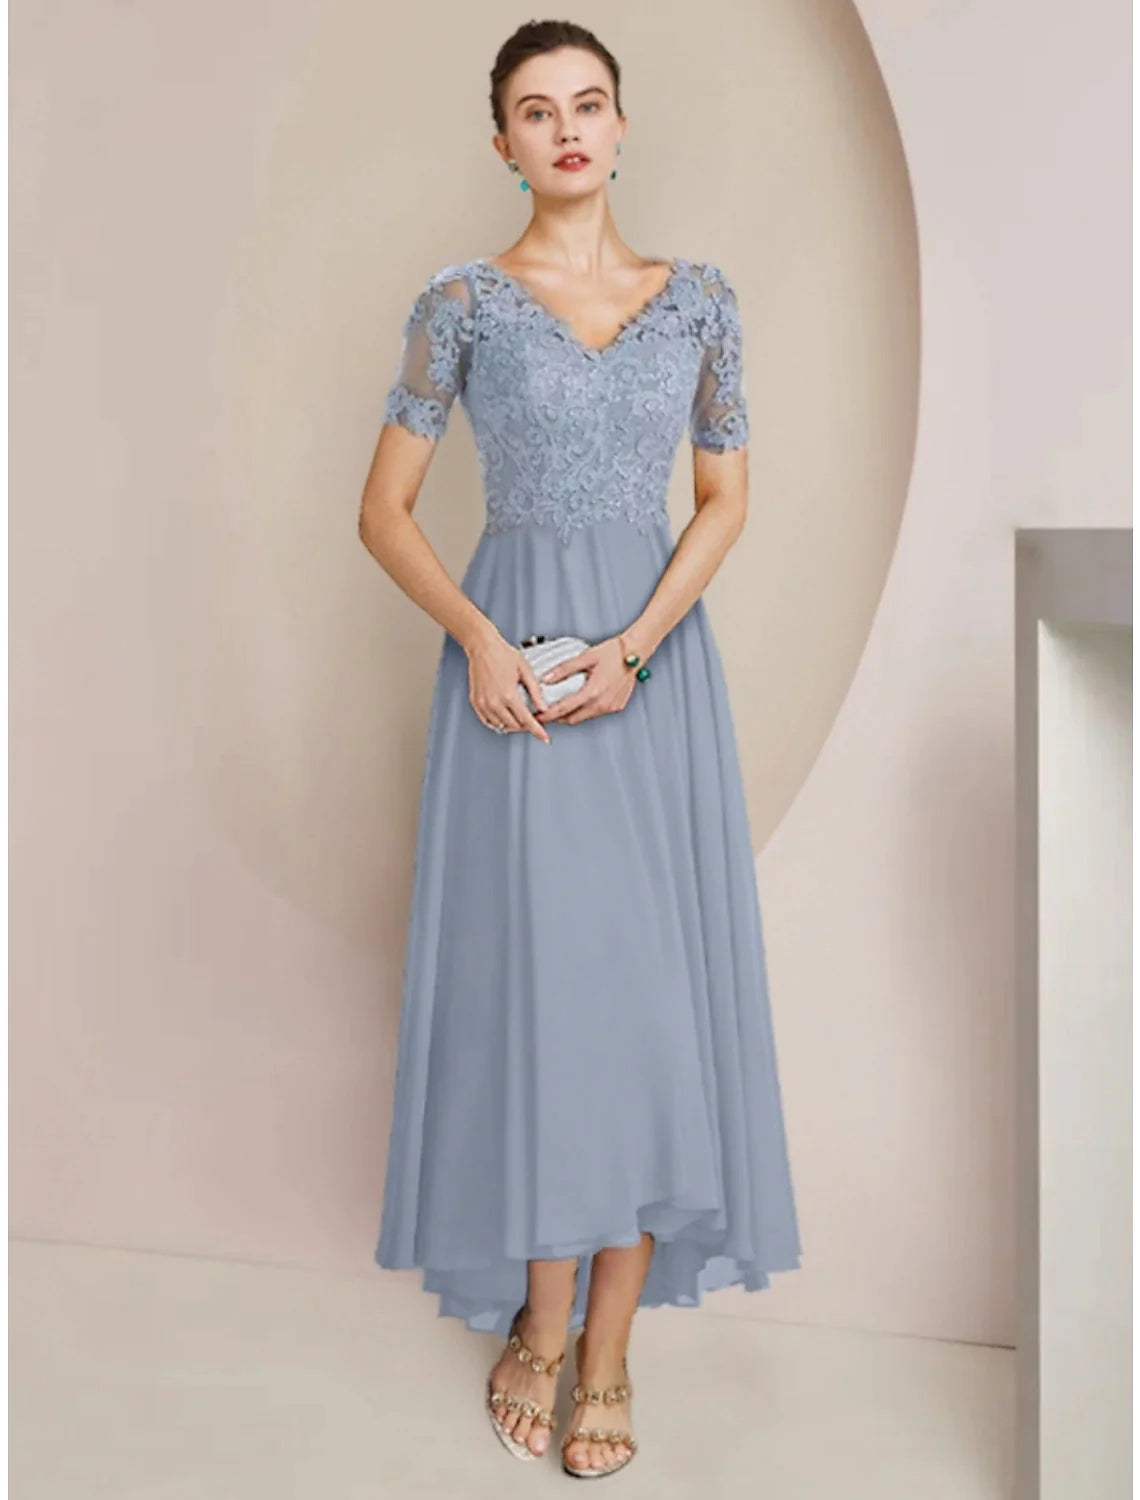 Sheath / Column Mother of the Bride Dress Wedding Guest Vintage Elegant V Neck Asymmetrical Ankle Length Chiffon Lace Half Sleeve with Pleats Solid Color